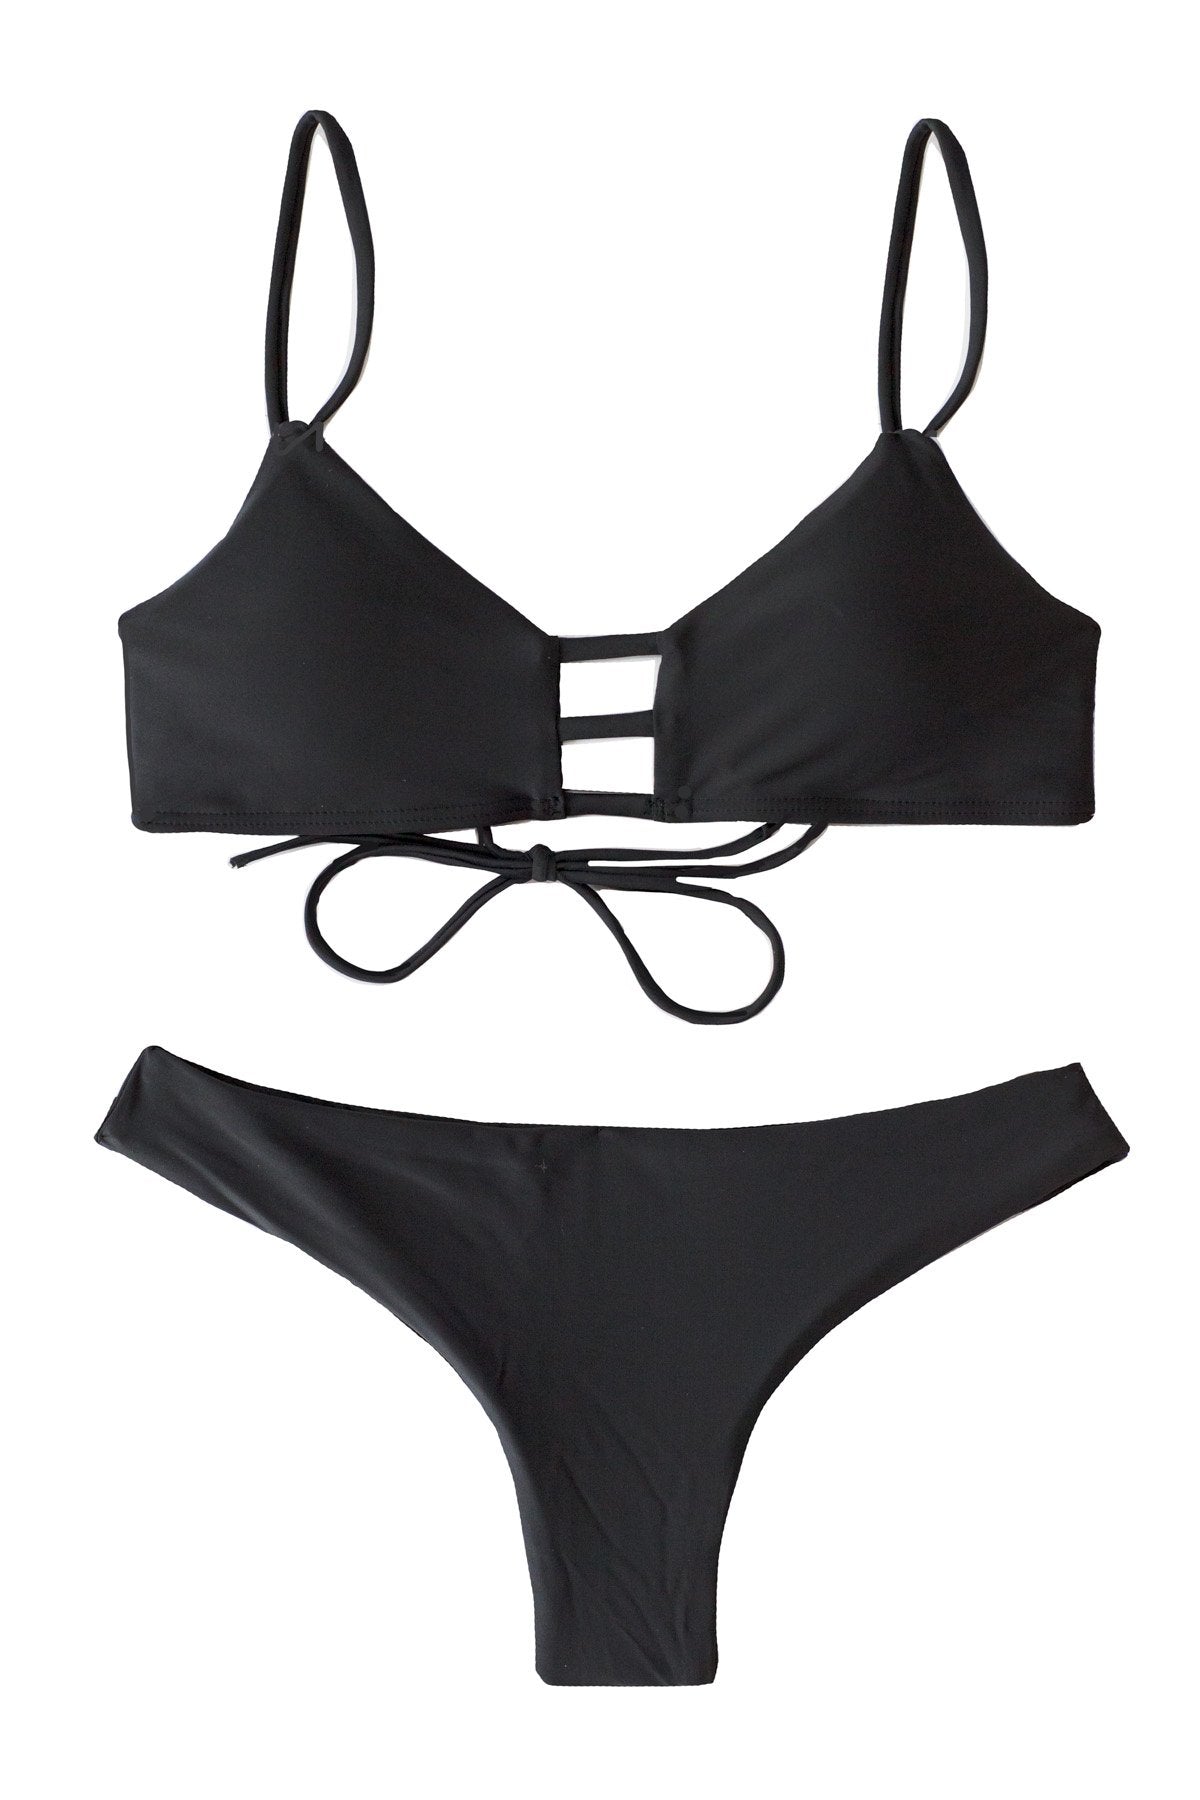 Classic Black Bikini Swimwear with Scoop top and Cheeky black bottoms and scrunchy detail